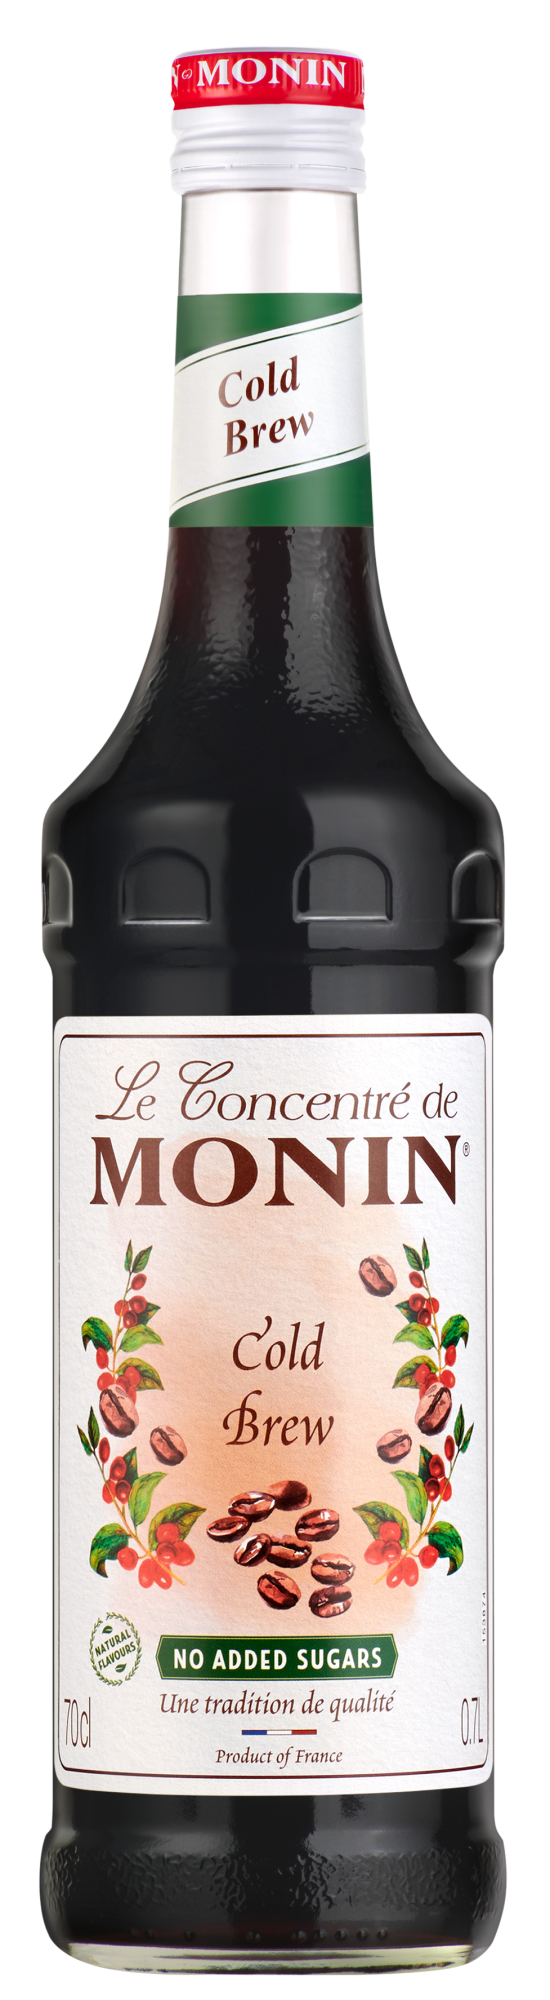 Buy MONIN Cold Brew Concentrate. It  is made by infusing ground coffee in cold water for about 12h